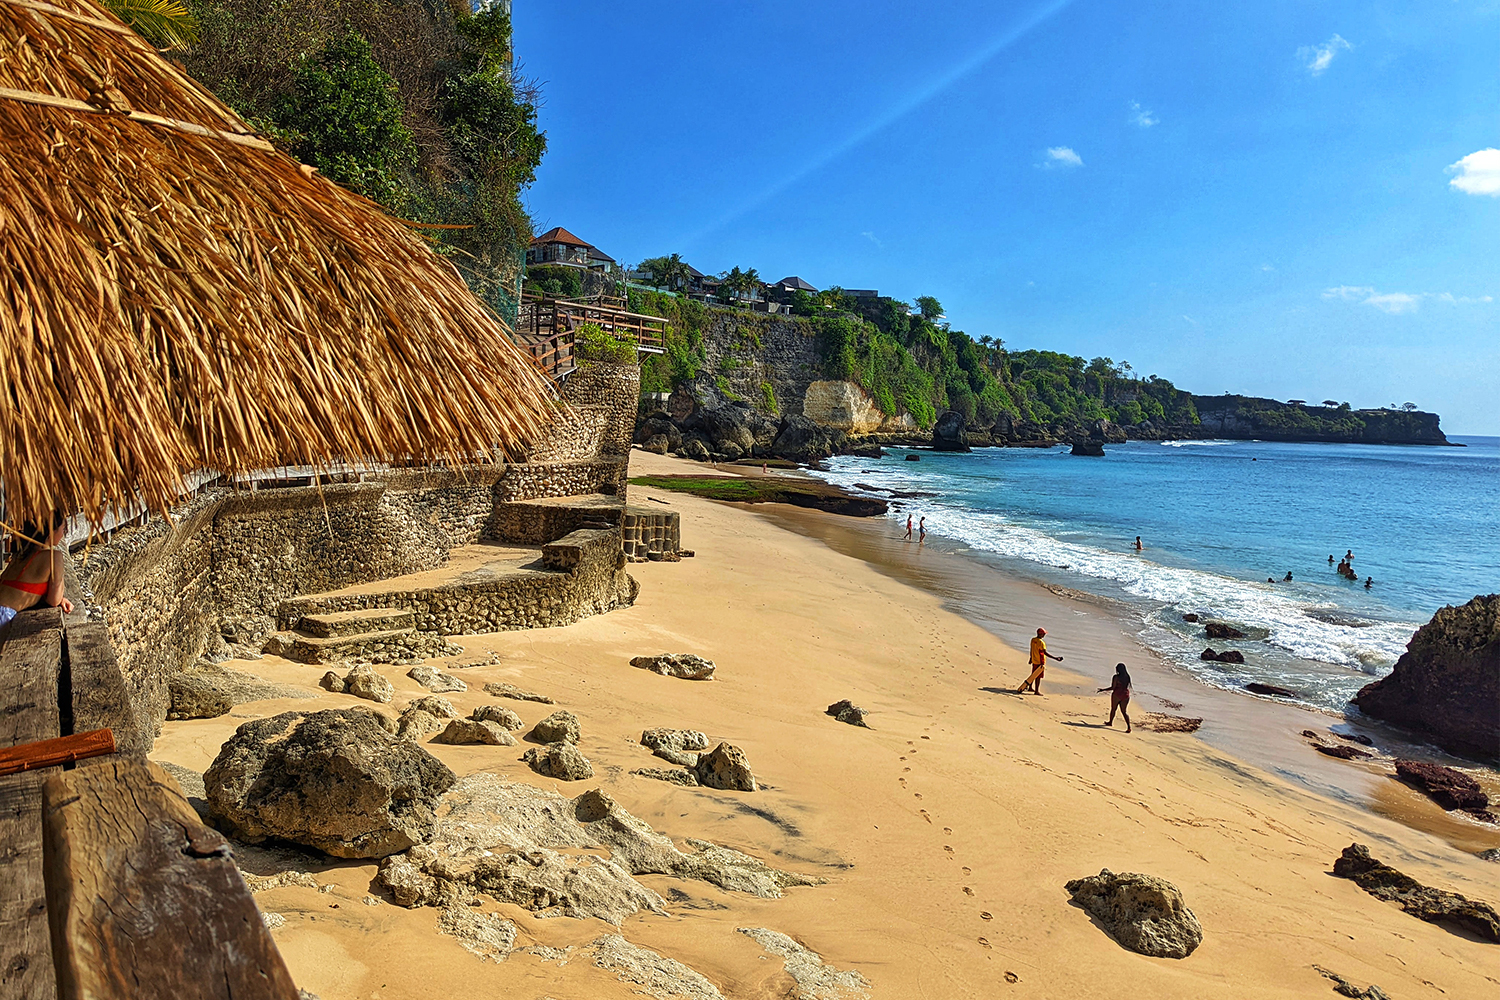 The beach at the Ayana resort in Bali, Indonesia